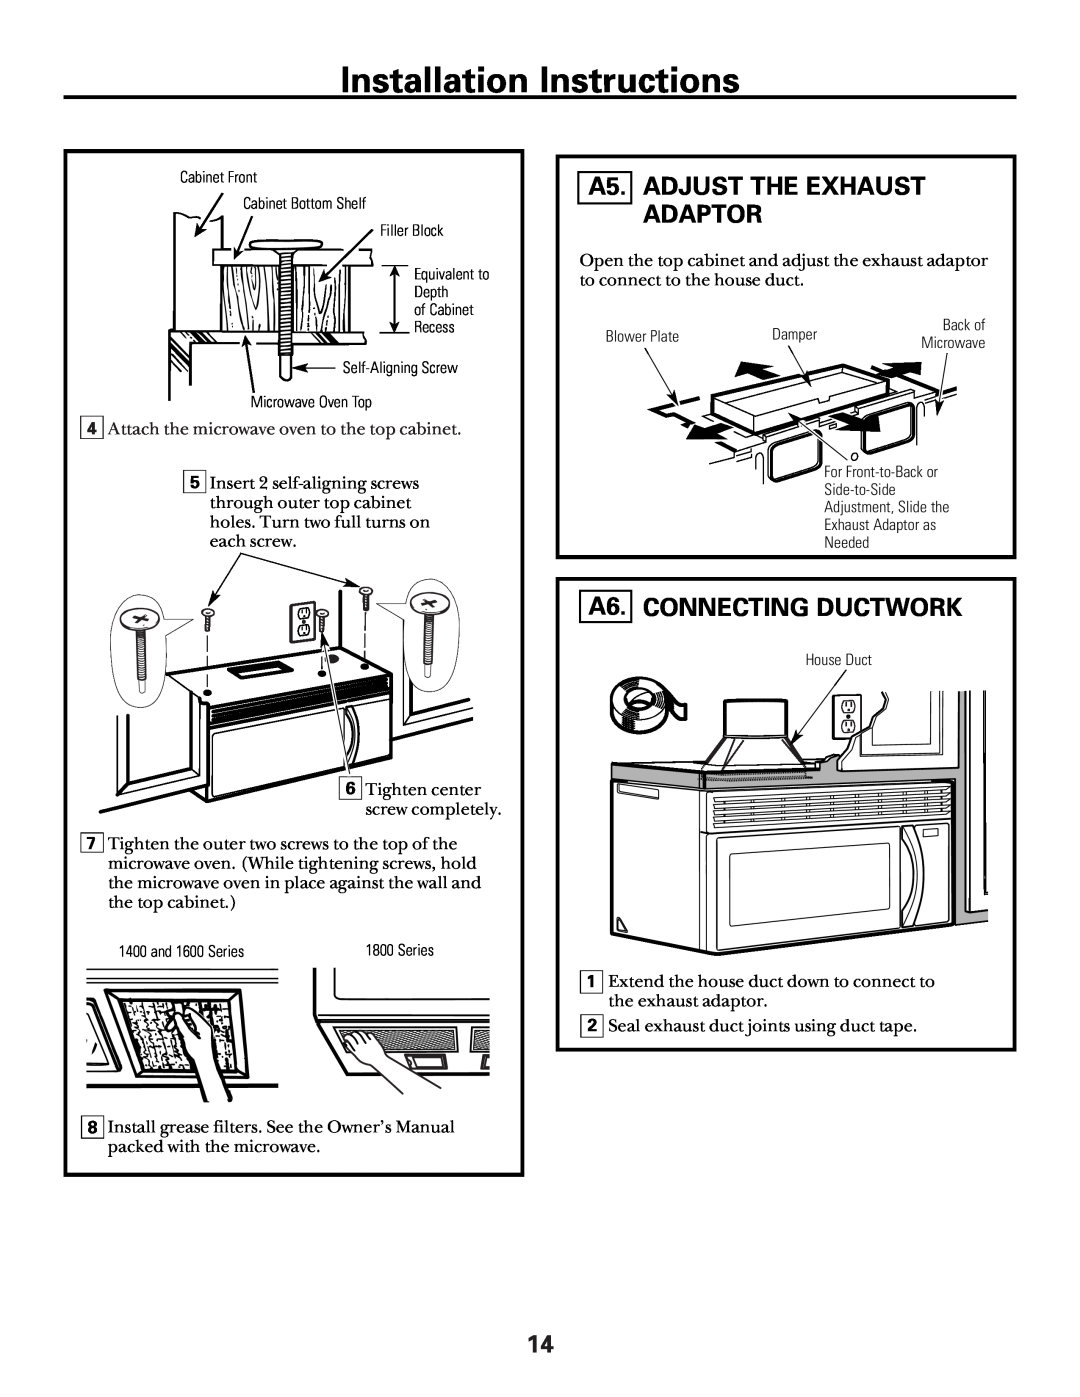 GE Over the Range Microwave Oven manual A5. ADJUST THE EXHAUST ADAPTOR, A6. CONNECTING DUCTWORK, Installation Instructions 